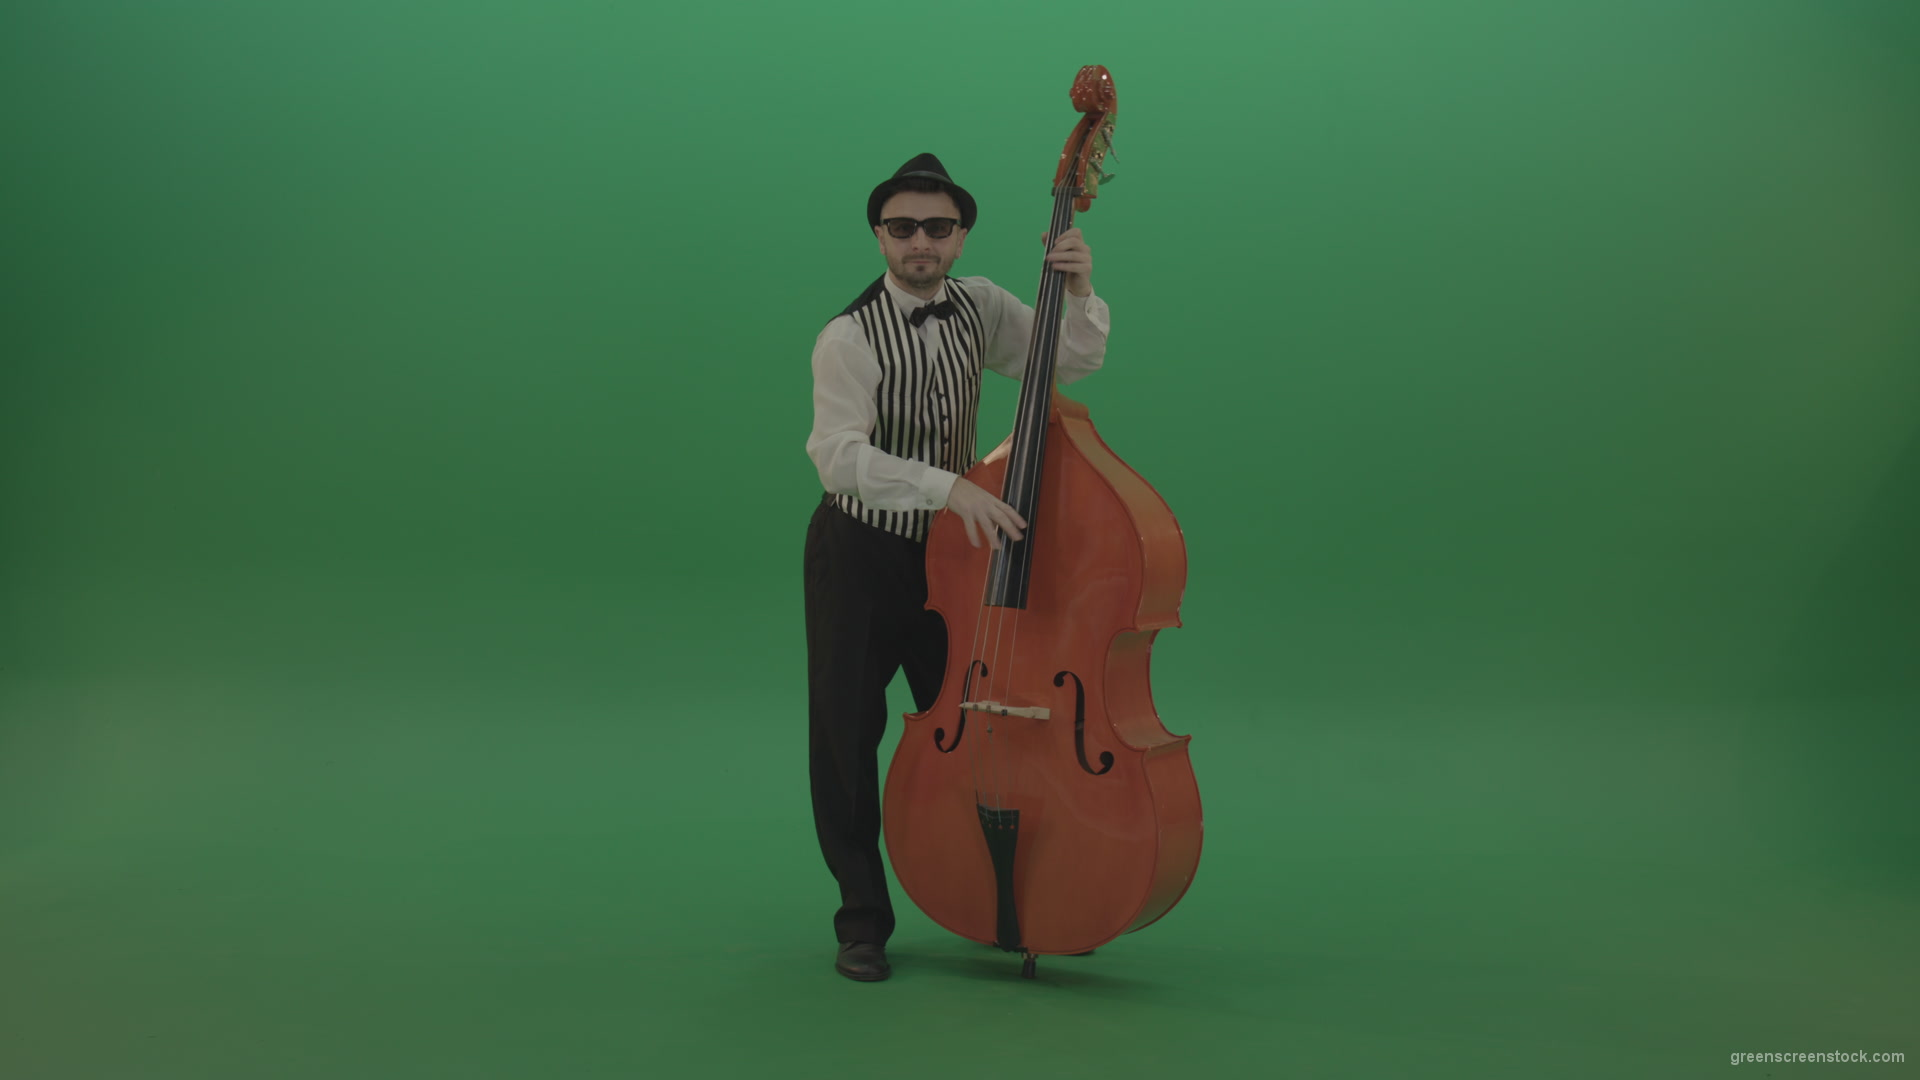 Full-size-man-play-jazz-on-double-bass-String-music-instrument-isolated-on-green-screen_007 Green Screen Stock